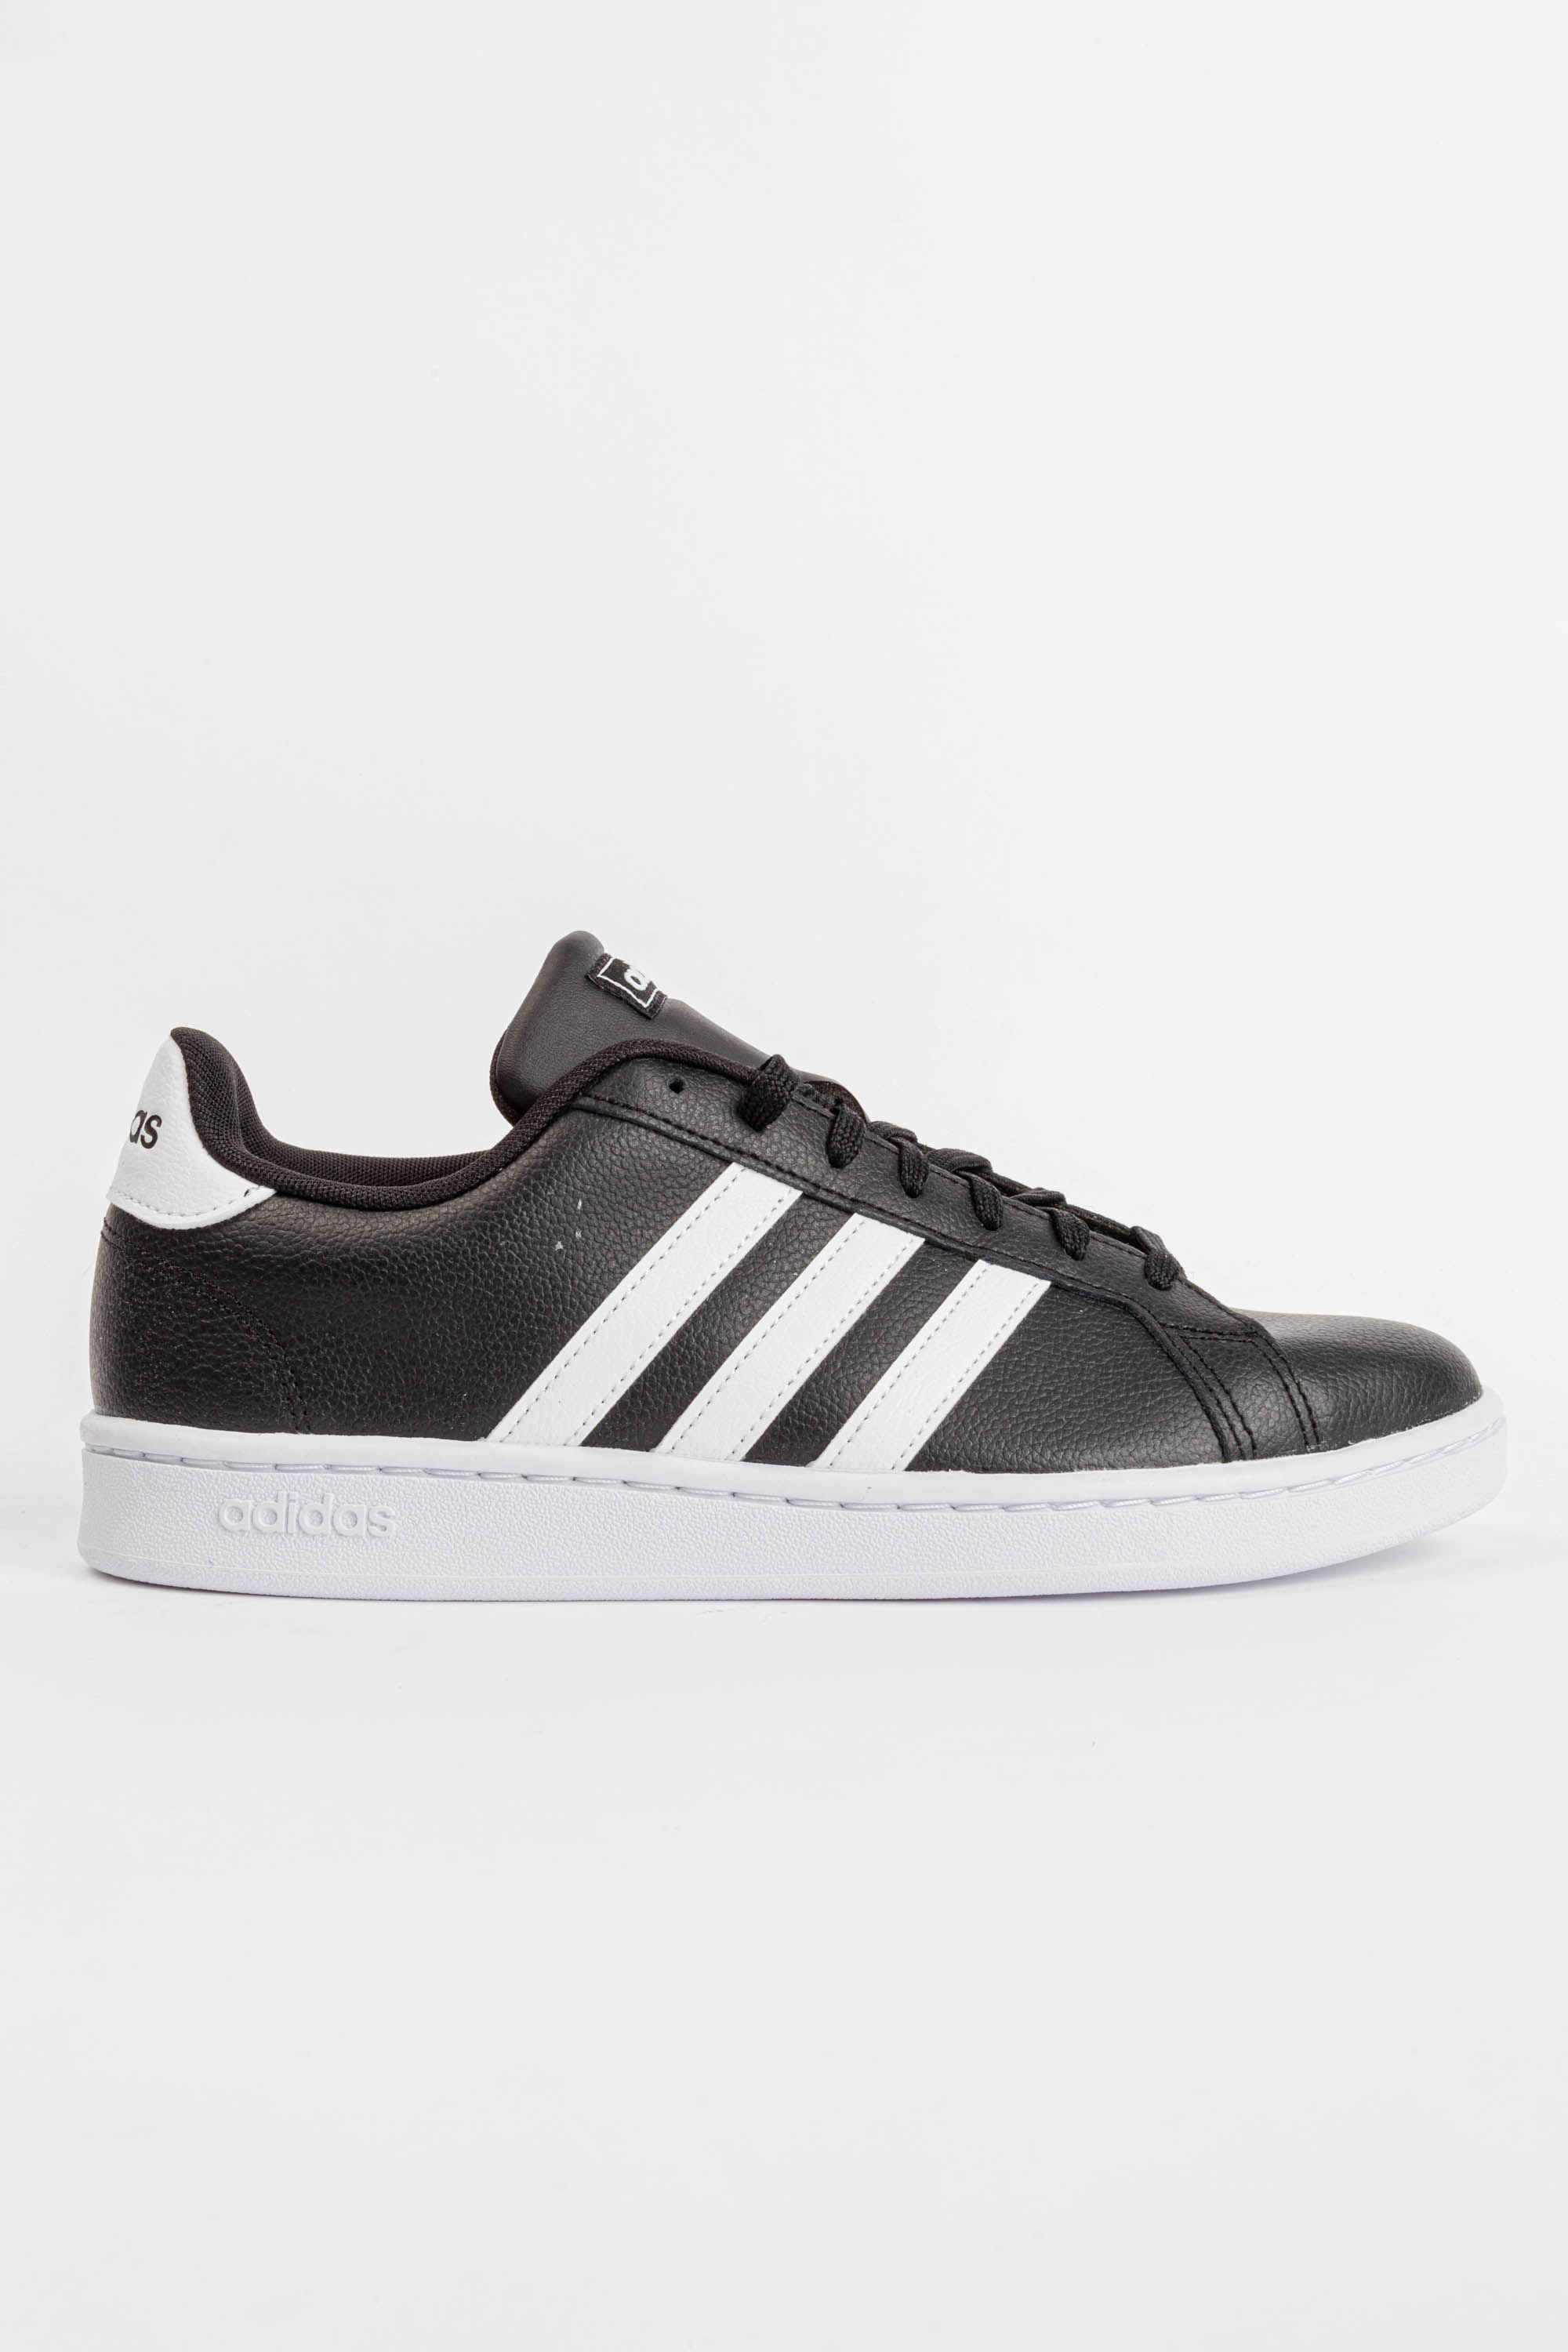 koppeling openbaring breed Adidas shoes - Griff Webshop